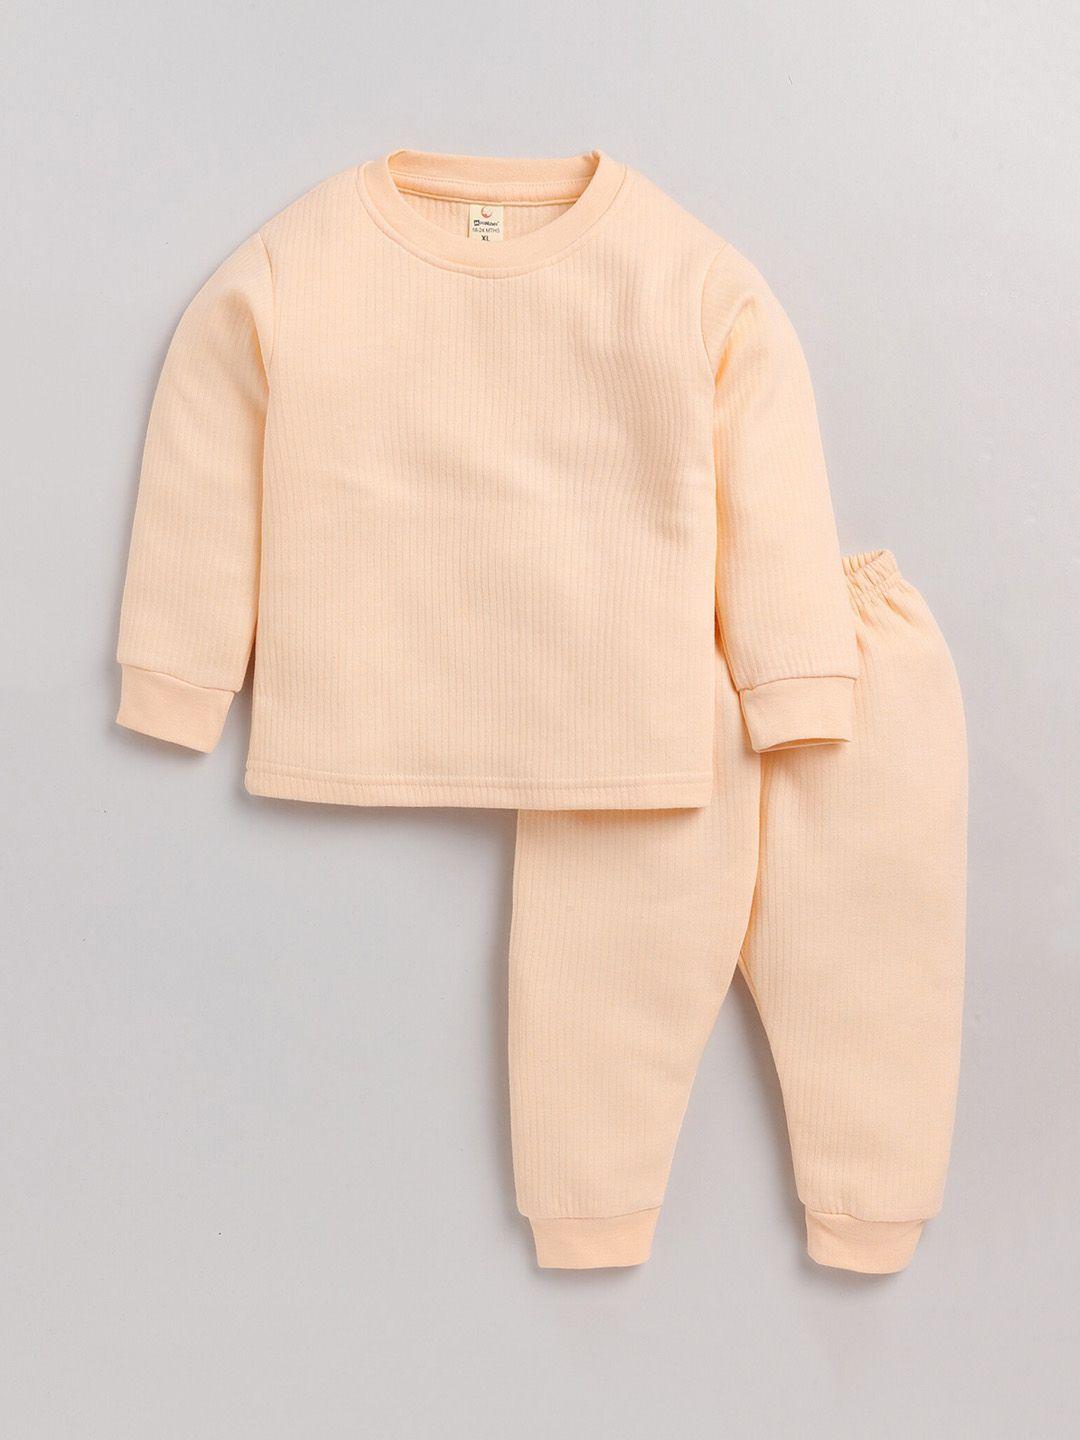 MooNKids Infant Boys Peach-Coloured Striped  Thermal Set